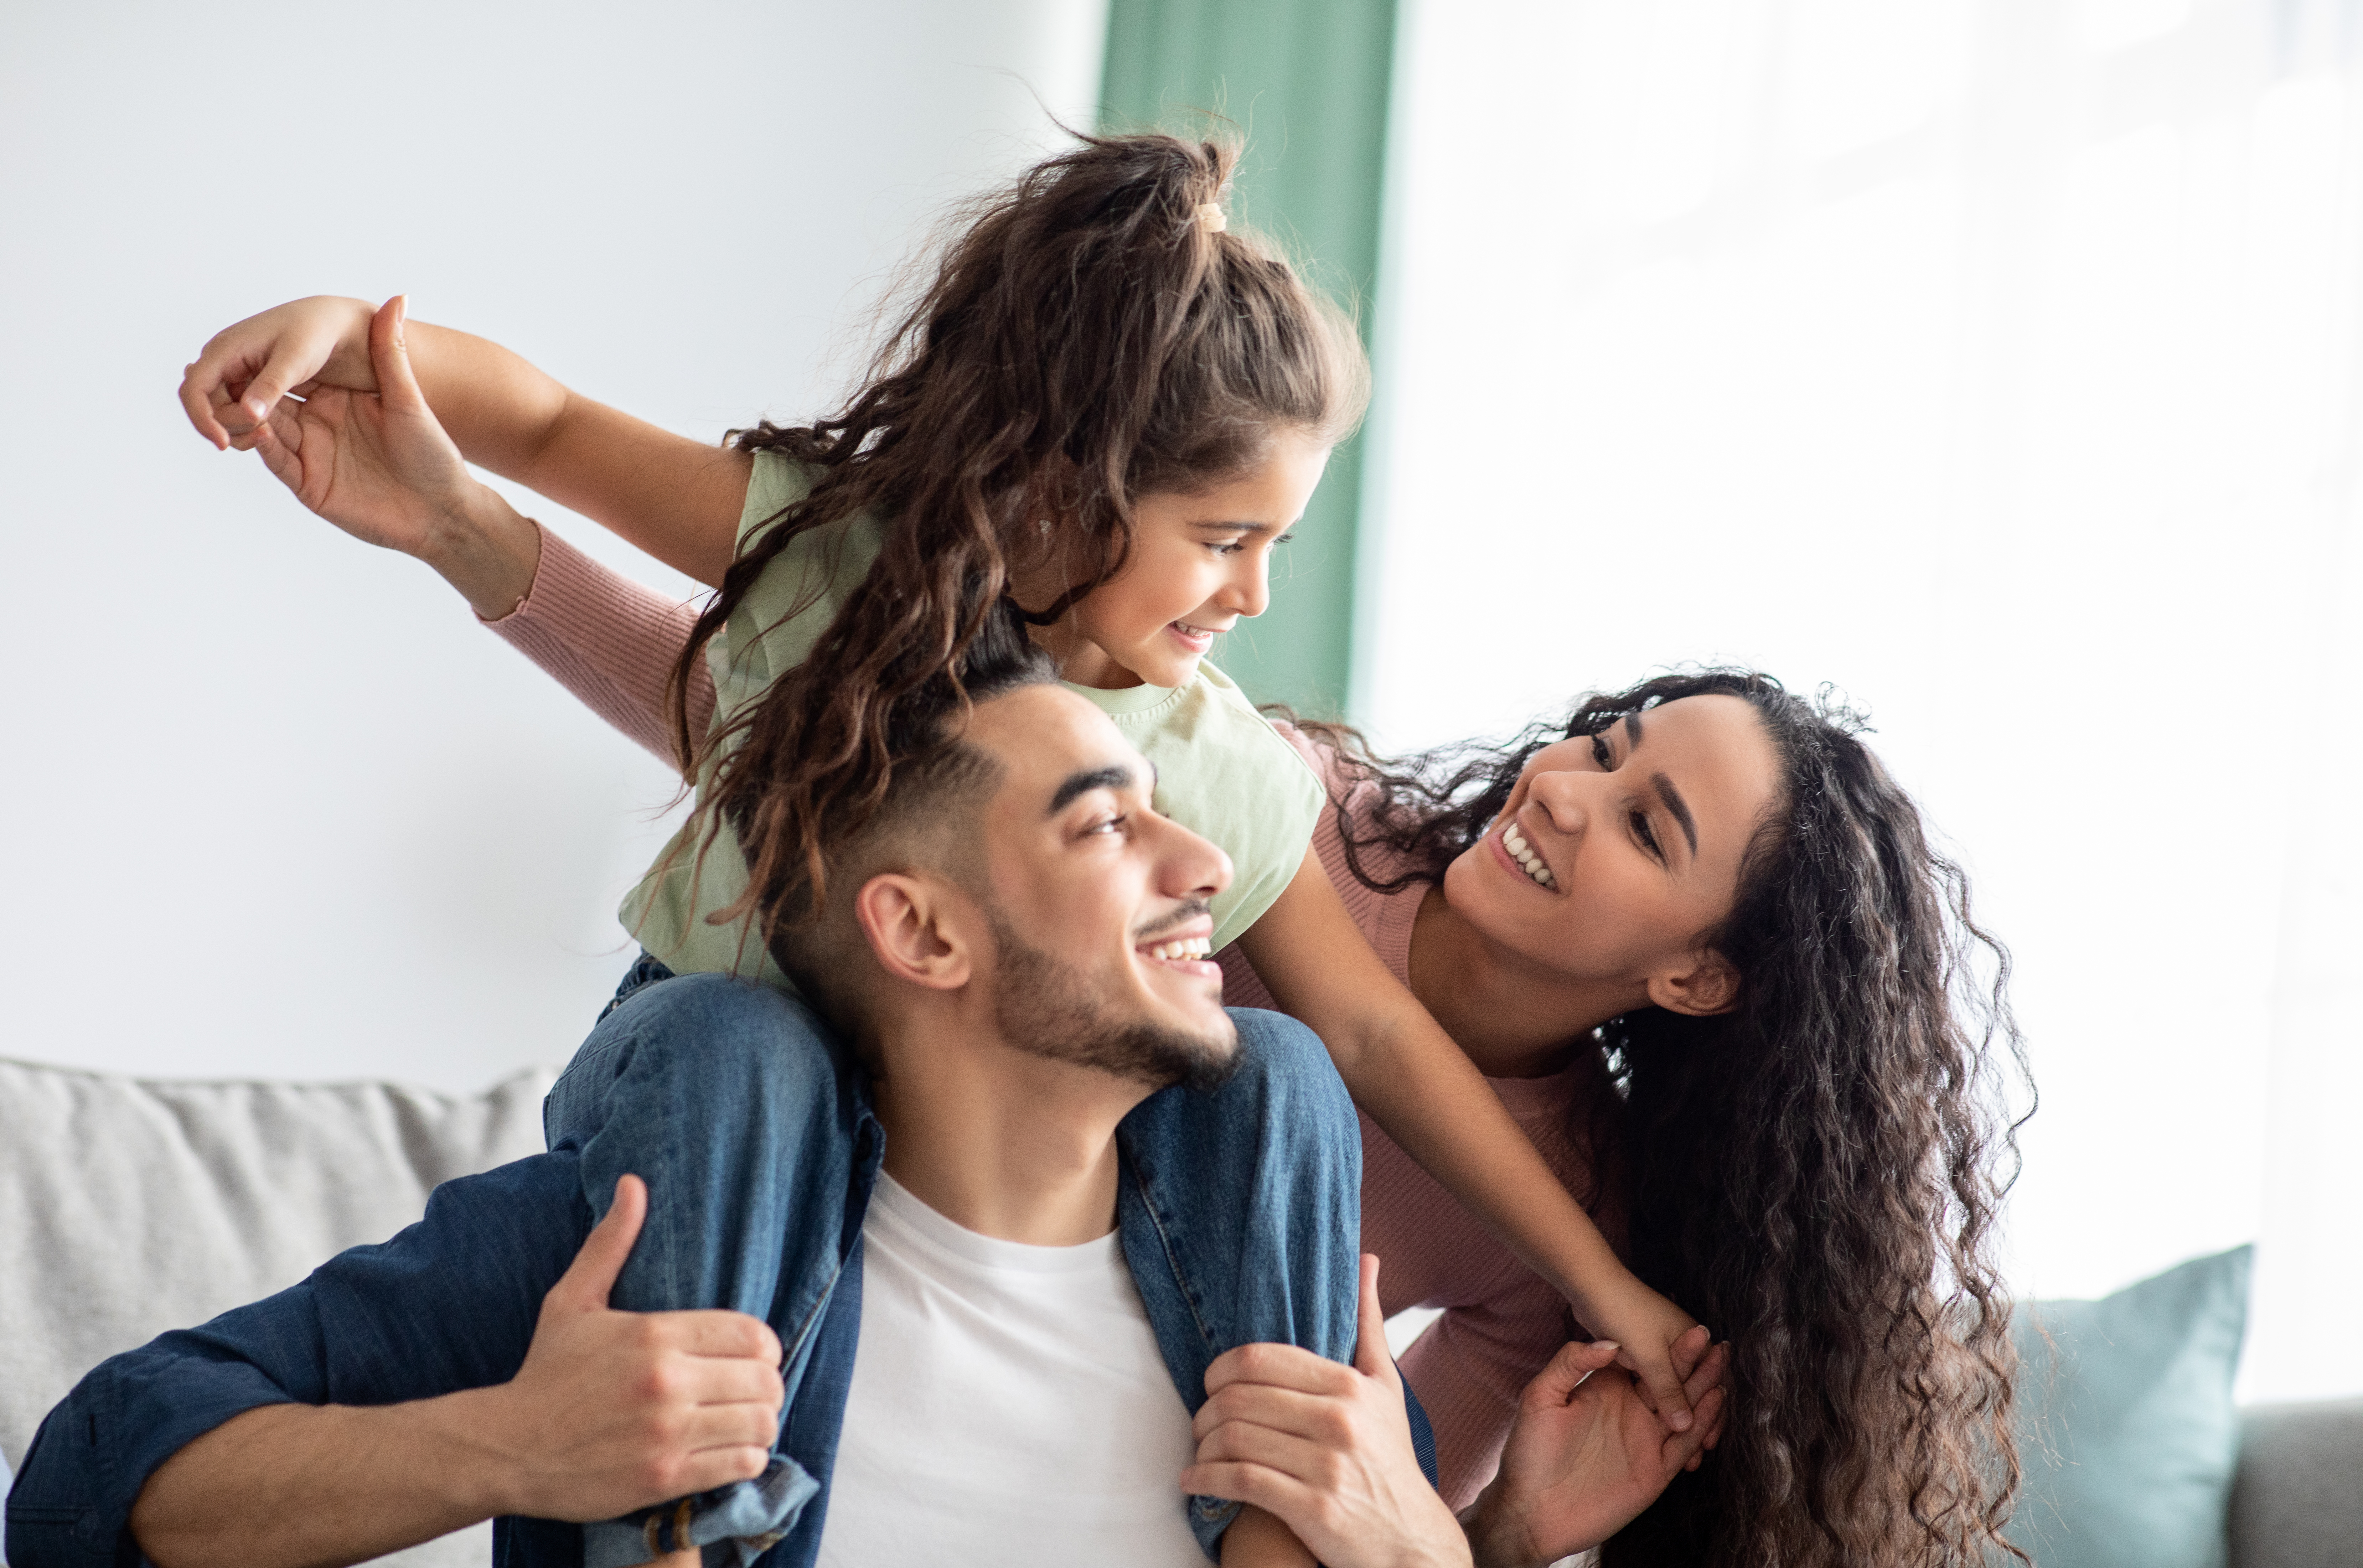 Parents are playing with their daughter | Source: Shutterstock